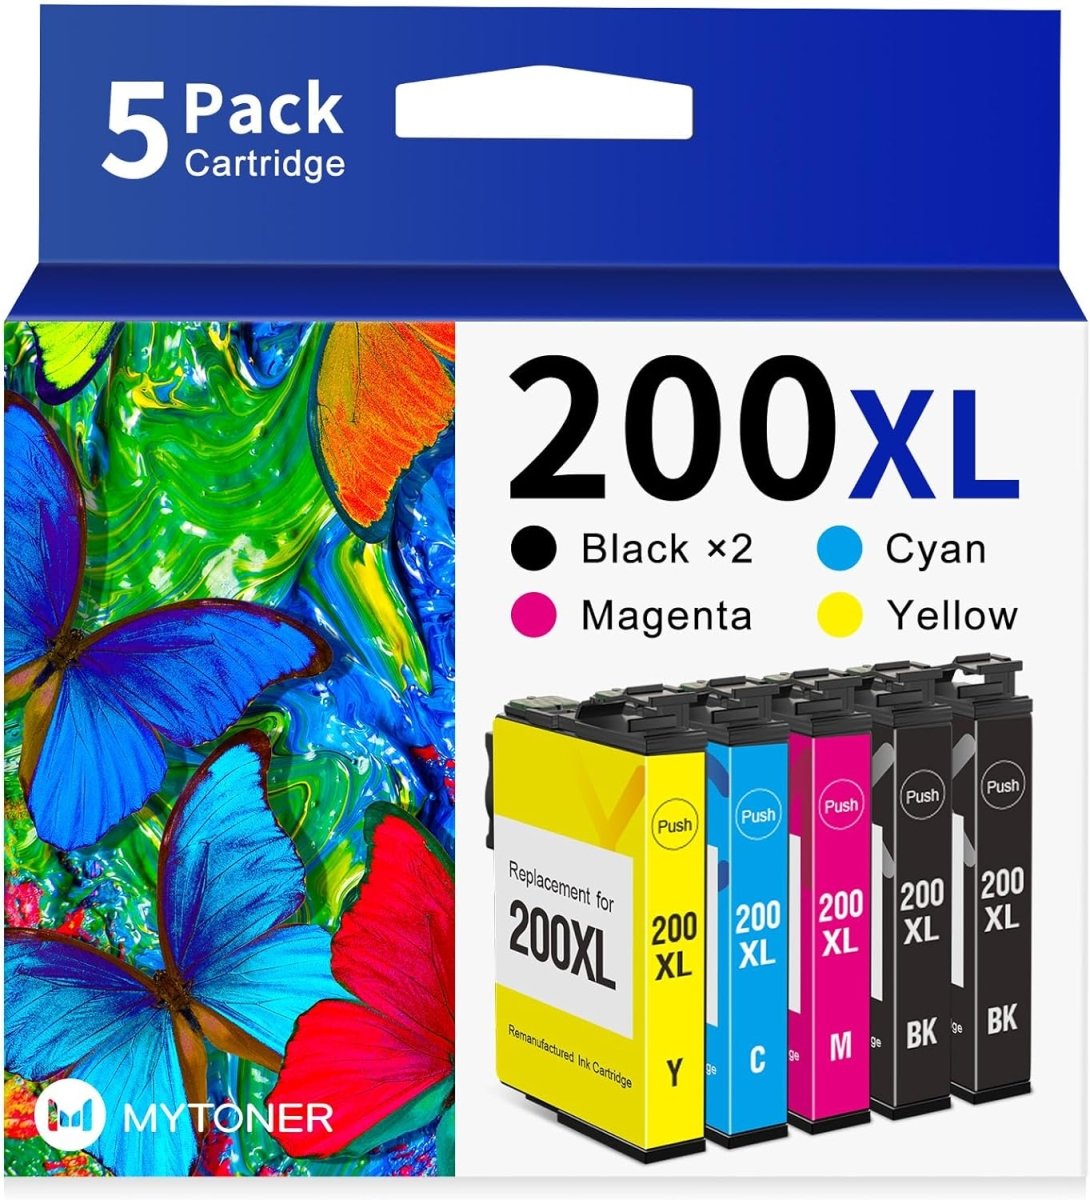 Remanufactured Epson 200XL Ink Cartridge High-Yield 5-Pack - Linford Office:Printer Ink & Toner Cartridge